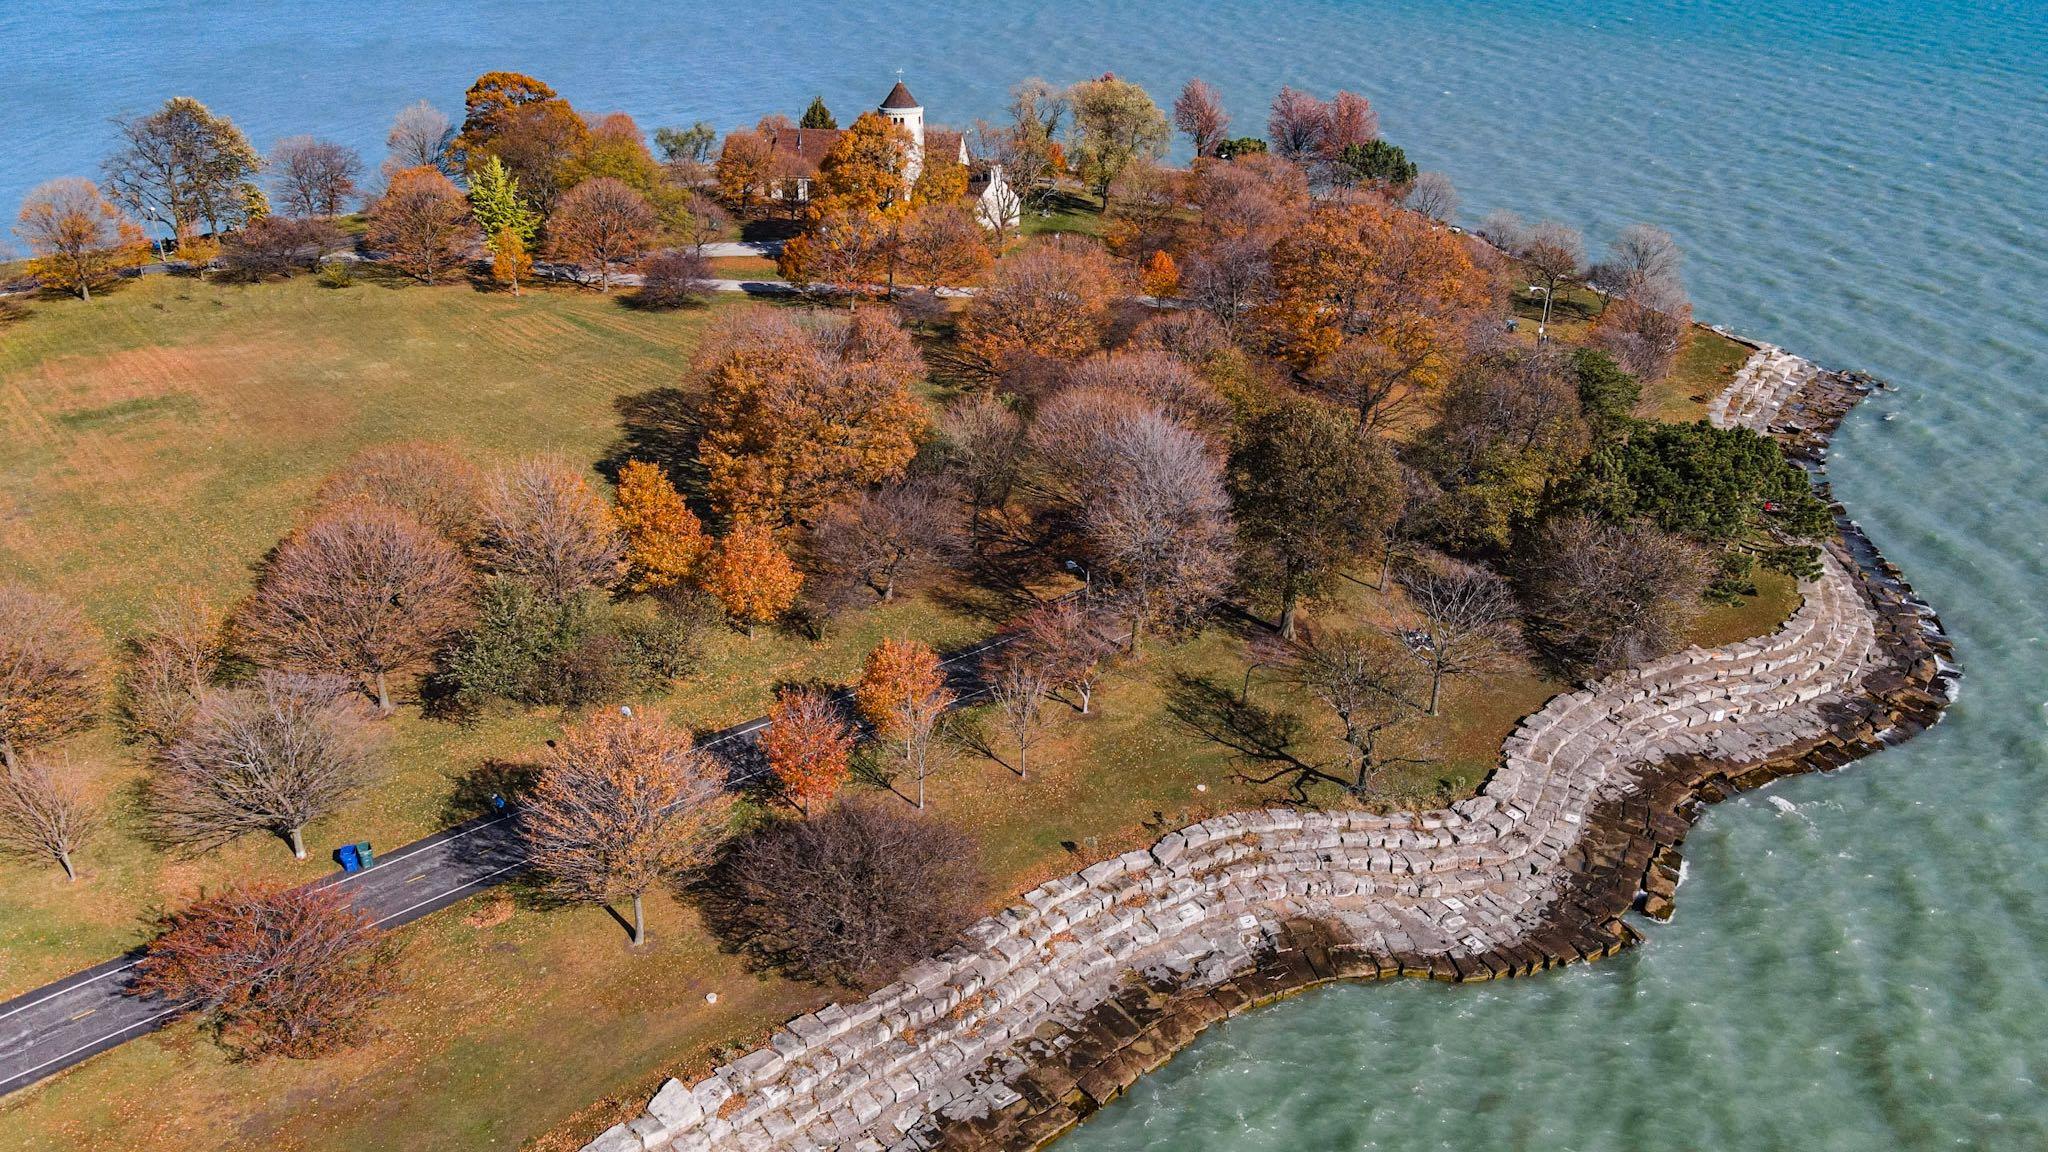 Promontory Point, on the south lakefront, is beloved for its natural aesthetic, designed by noted landscape architect Alfred Caldwell in 1937. (Preservation Chicago / Eric Allix Rogers)